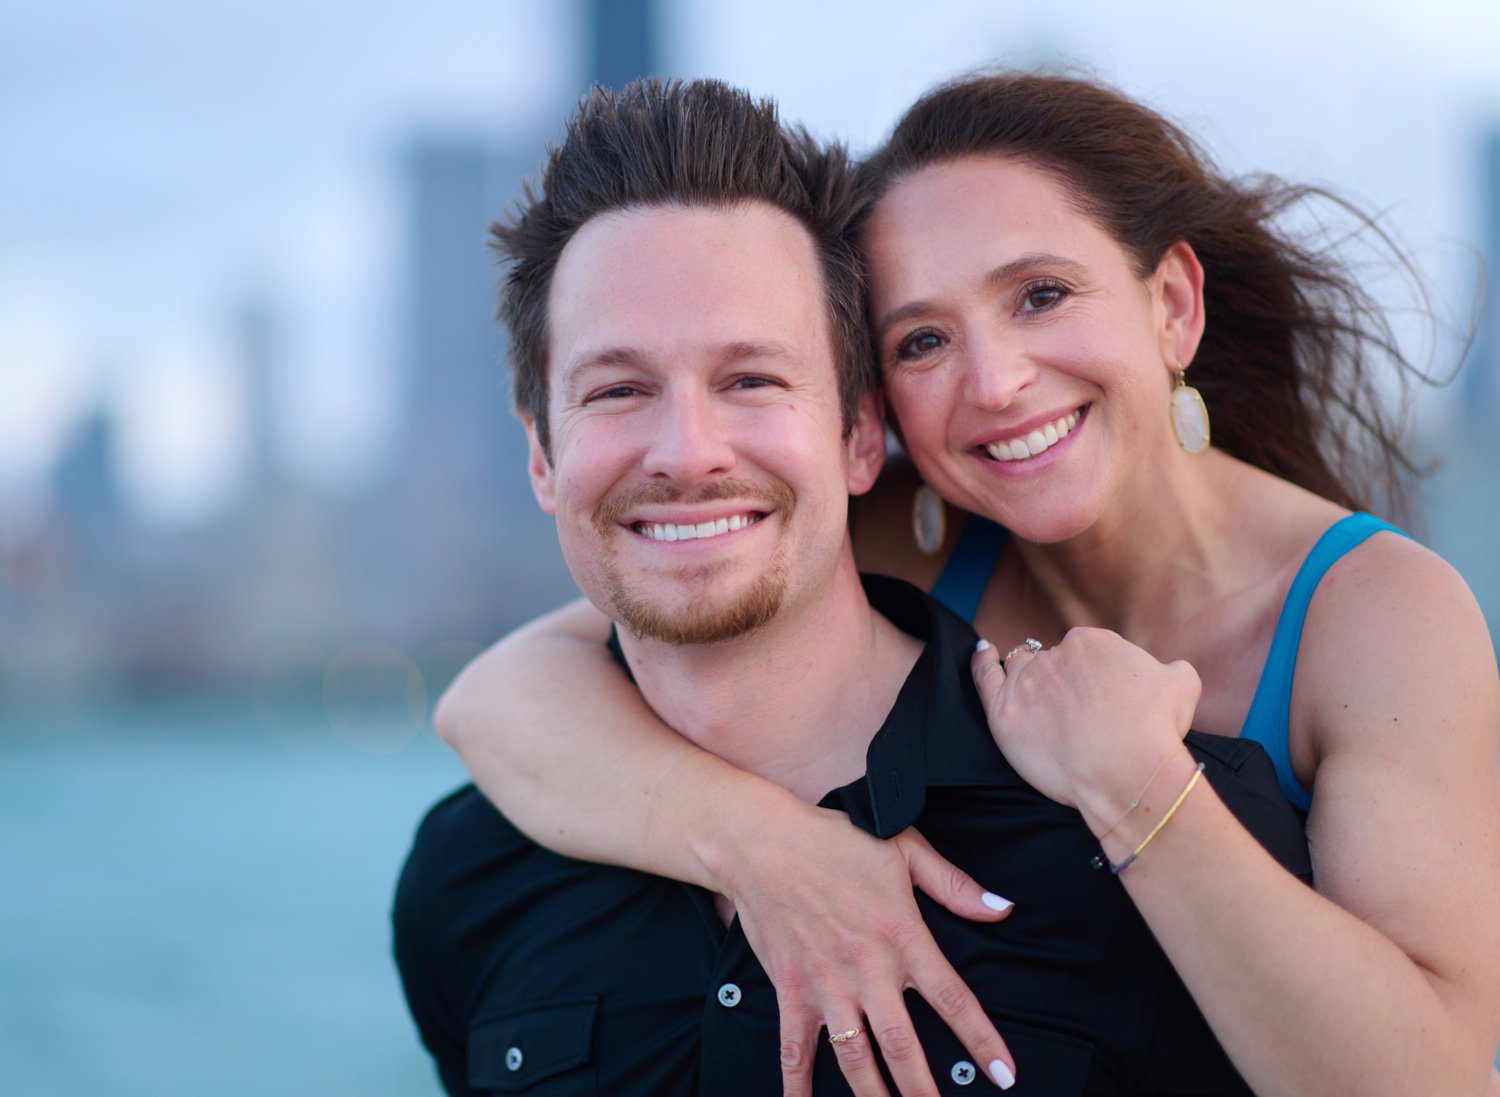 North Avenue Beach engagement photos chicago couple engaged smiling